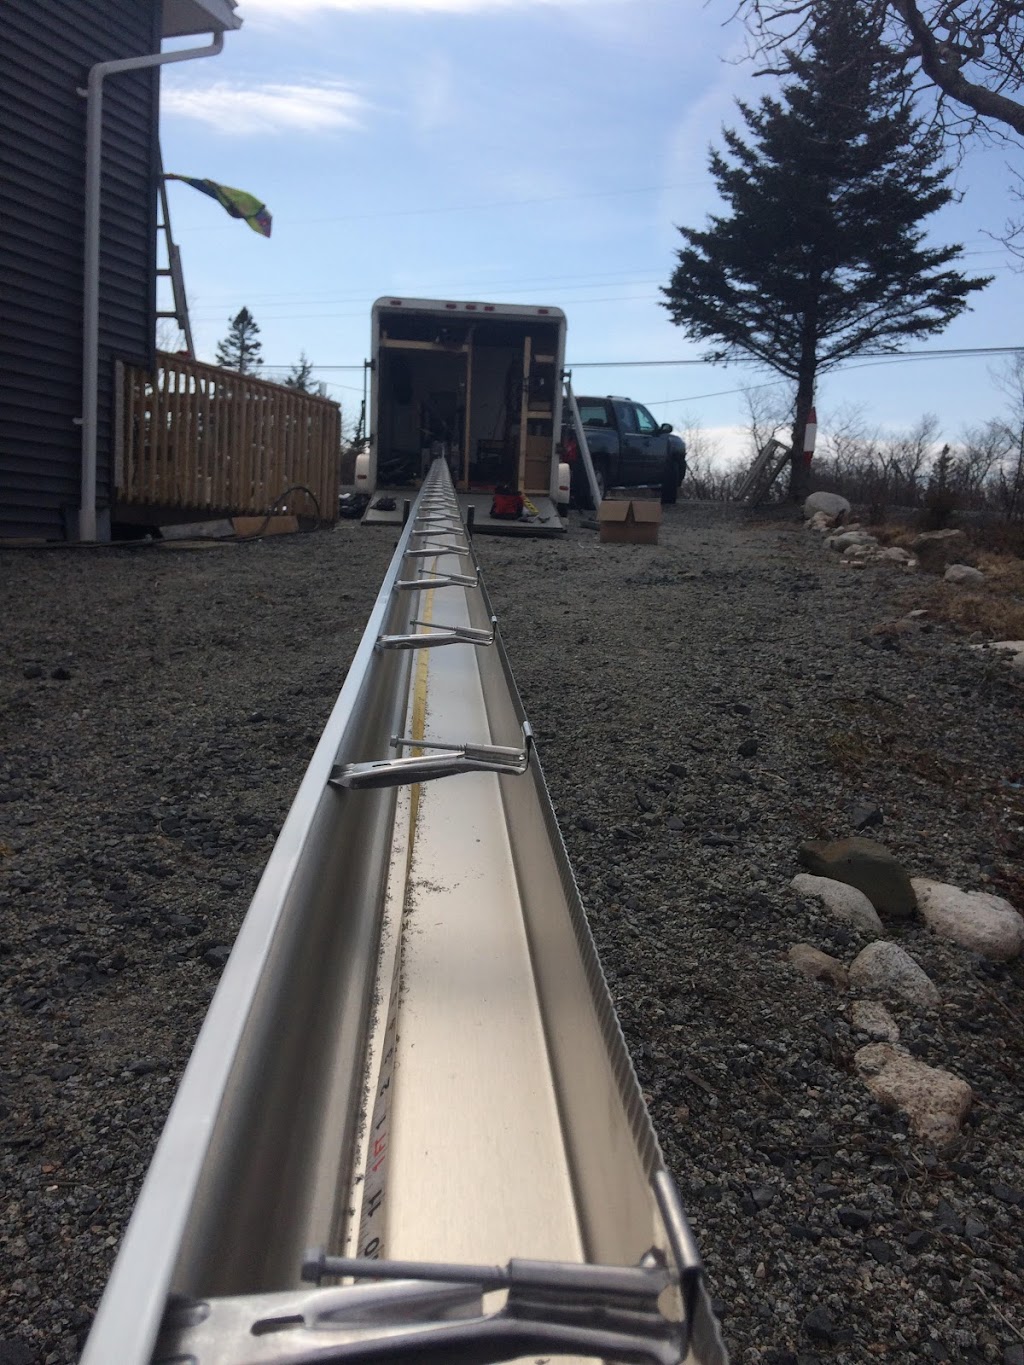 Northern Seamless Gutters | 181 Herring Cove Rd Suite 201, Halifax, NS B3P 1K9, Canada | Phone: (902) 817-0801